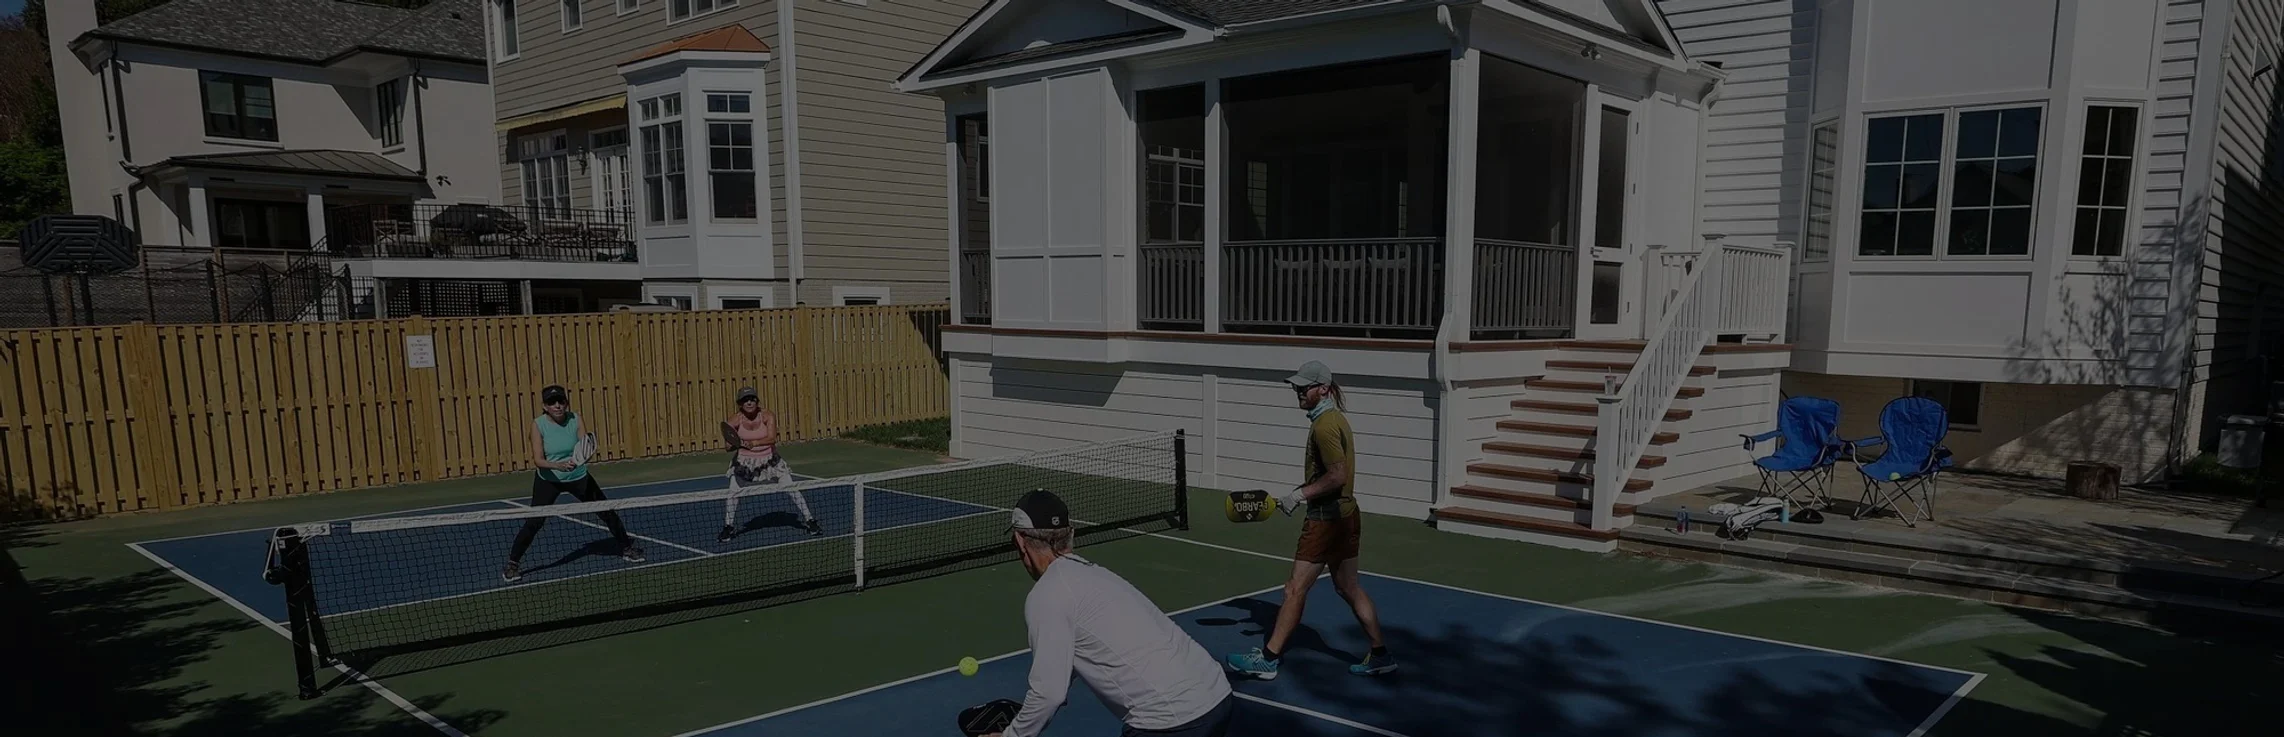 A group of people playing pickleball